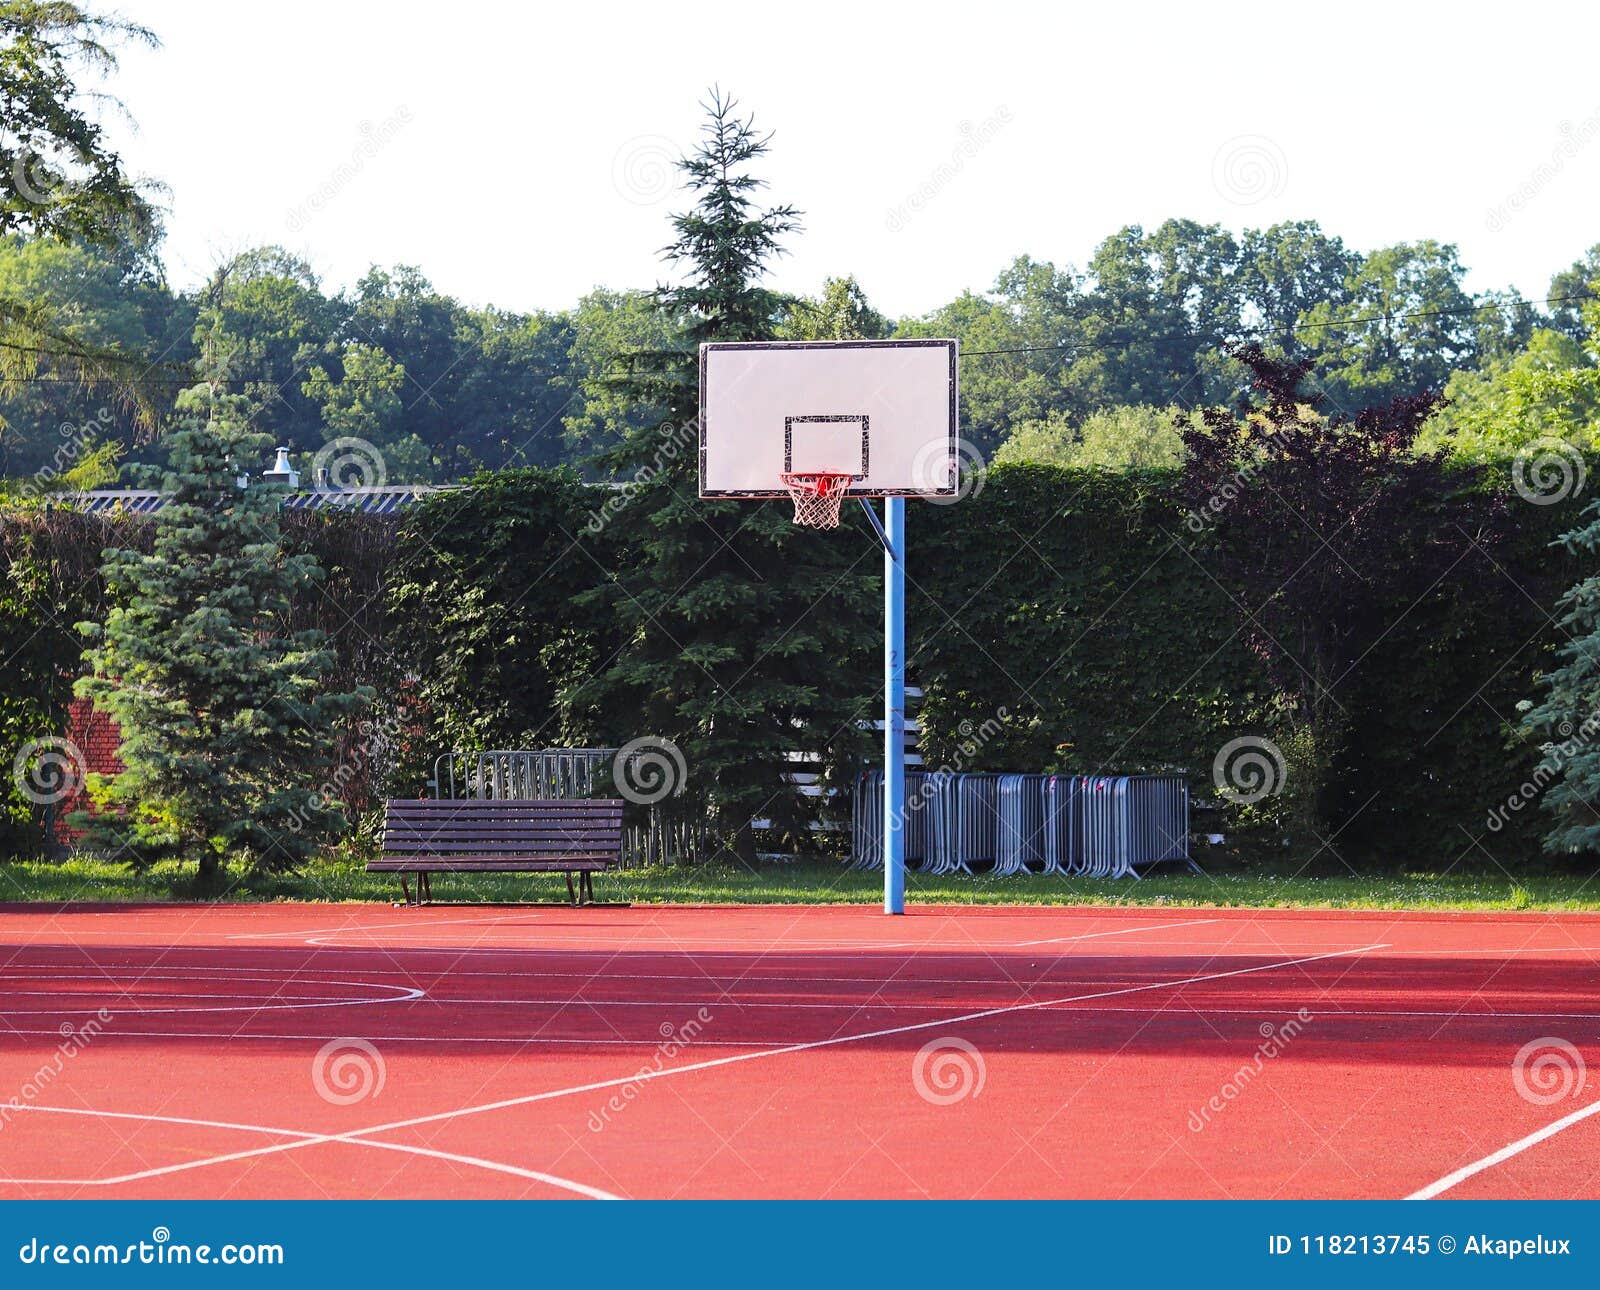 modern basketball court in the courtyard of primary school. multifunctional children`s playground with artificial surfaced fenced